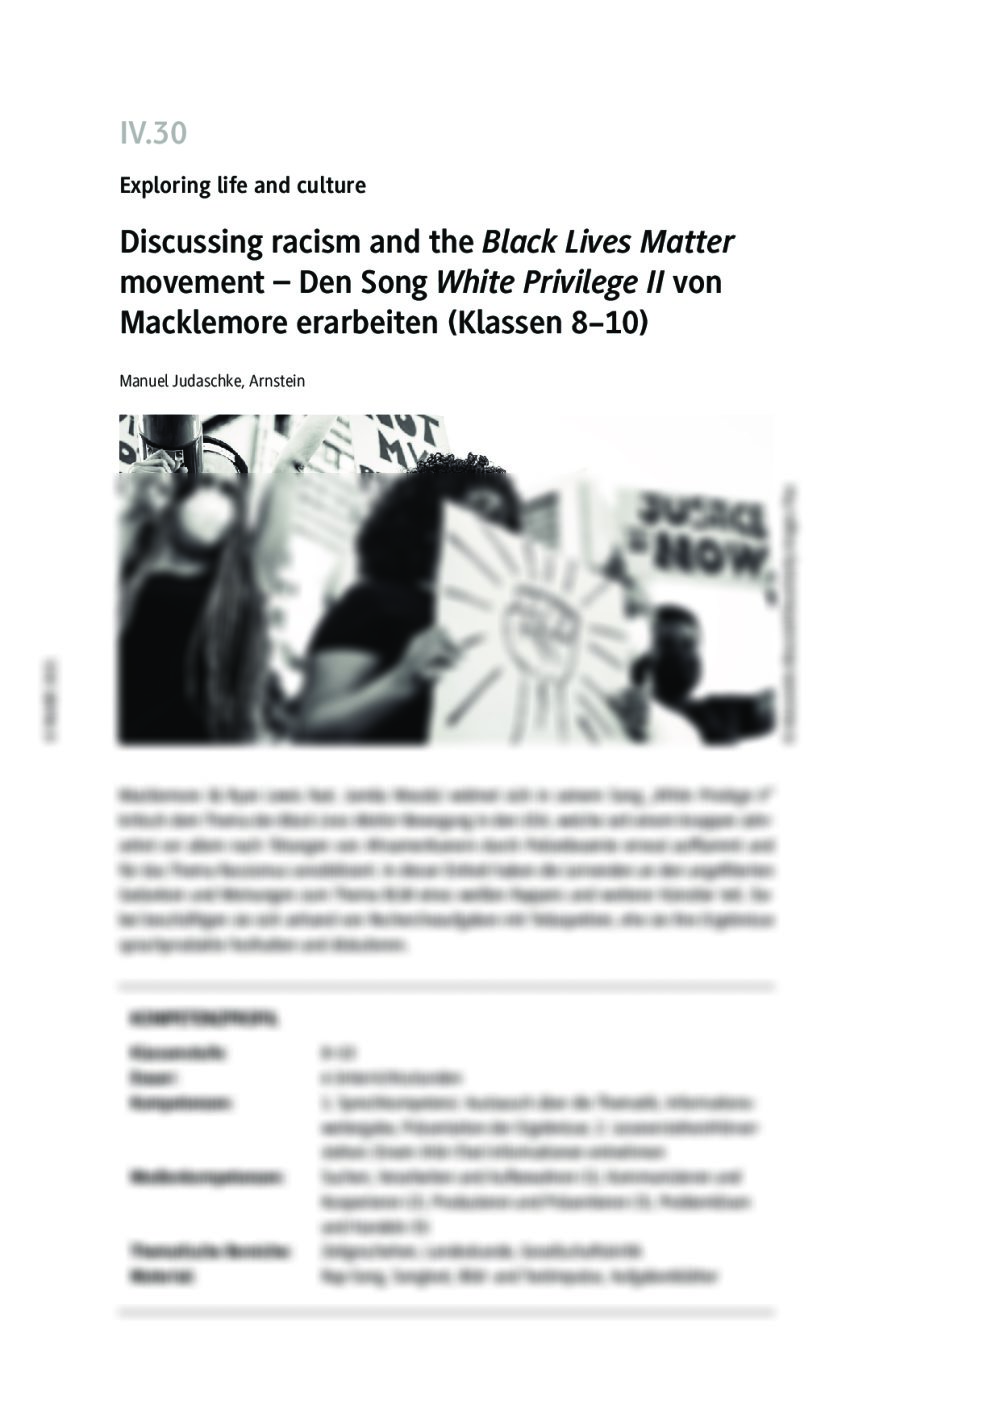 Discussing racism and the "Black Lives Matter" movement - Seite 1